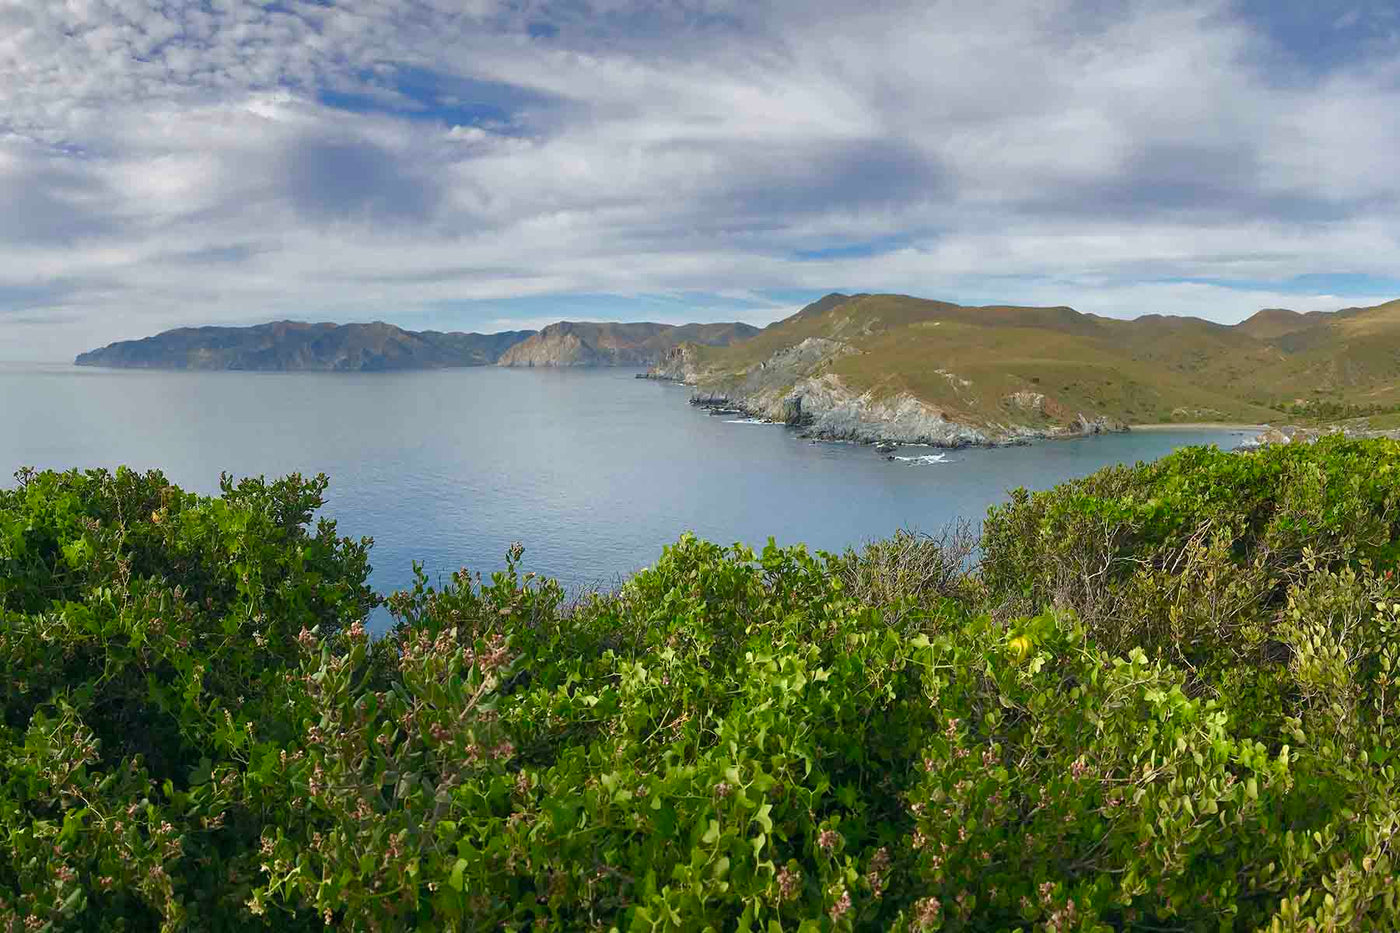 Hike of the Week: Trans-Catalina Trail